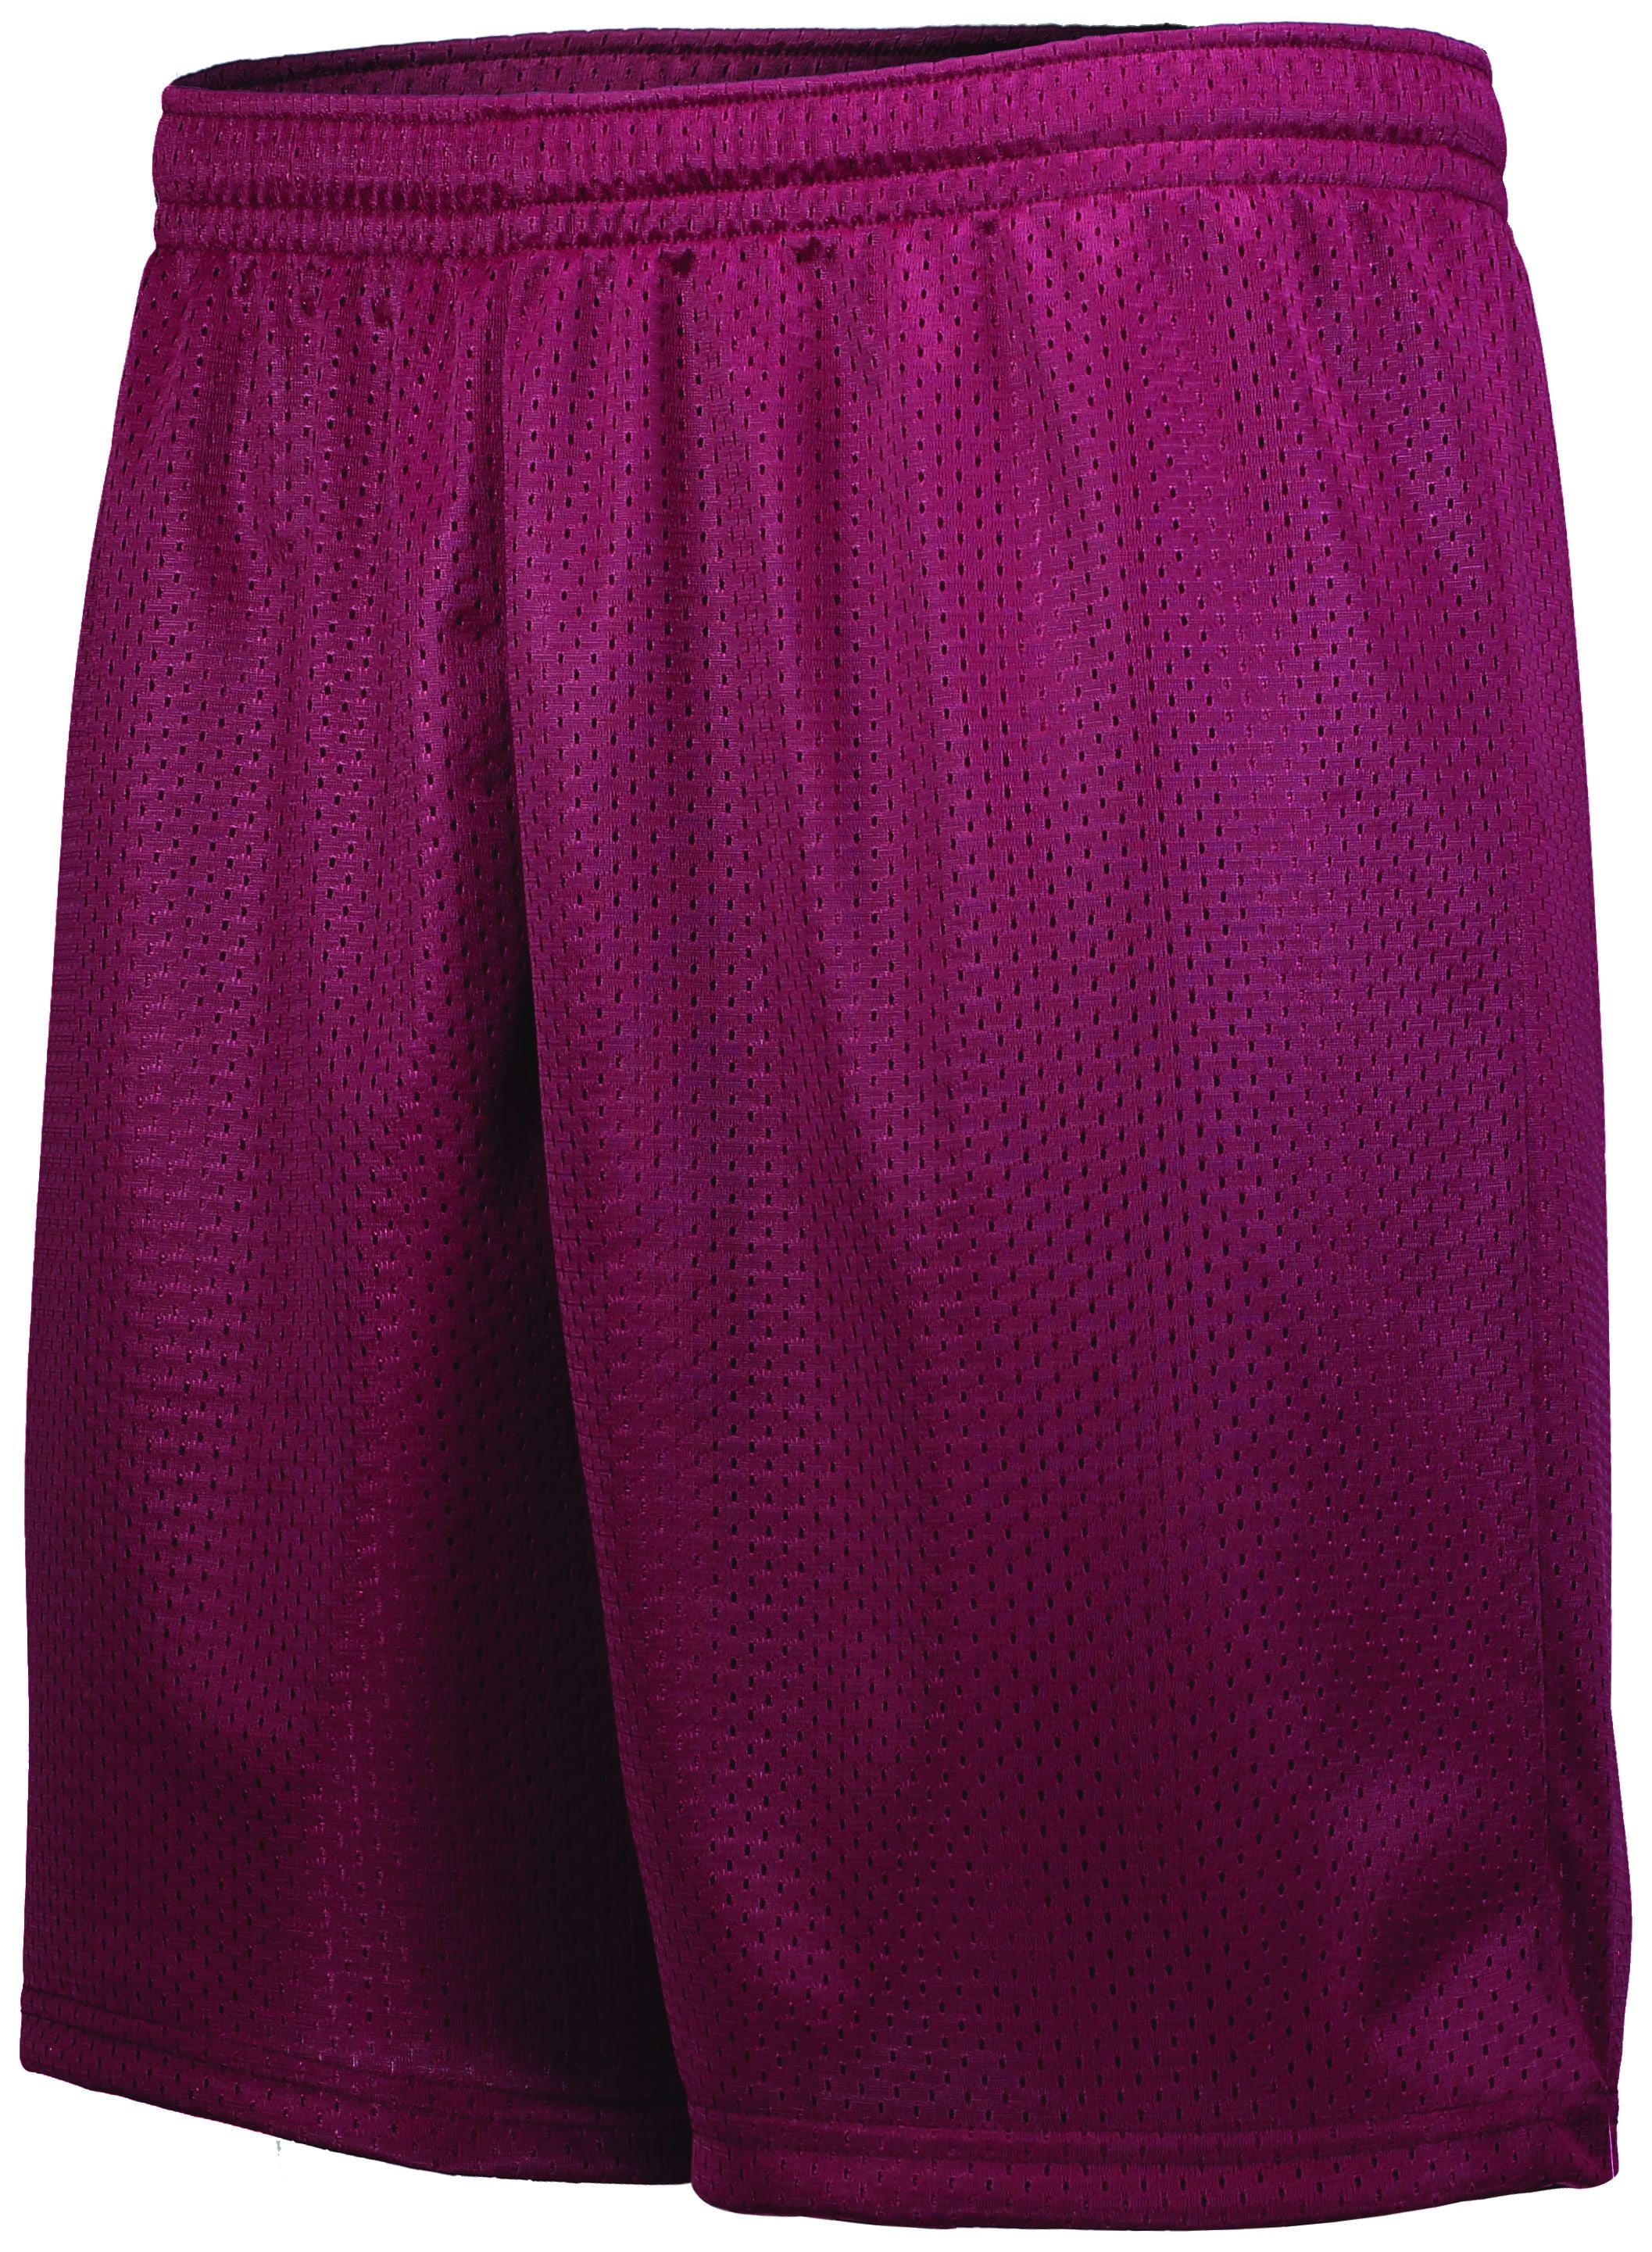 Augusta Sportswear Youth Tricot Mesh Shorts in Maroon (Hlw)  -Part of the Youth, Youth-Shorts, Augusta-Products product lines at KanaleyCreations.com